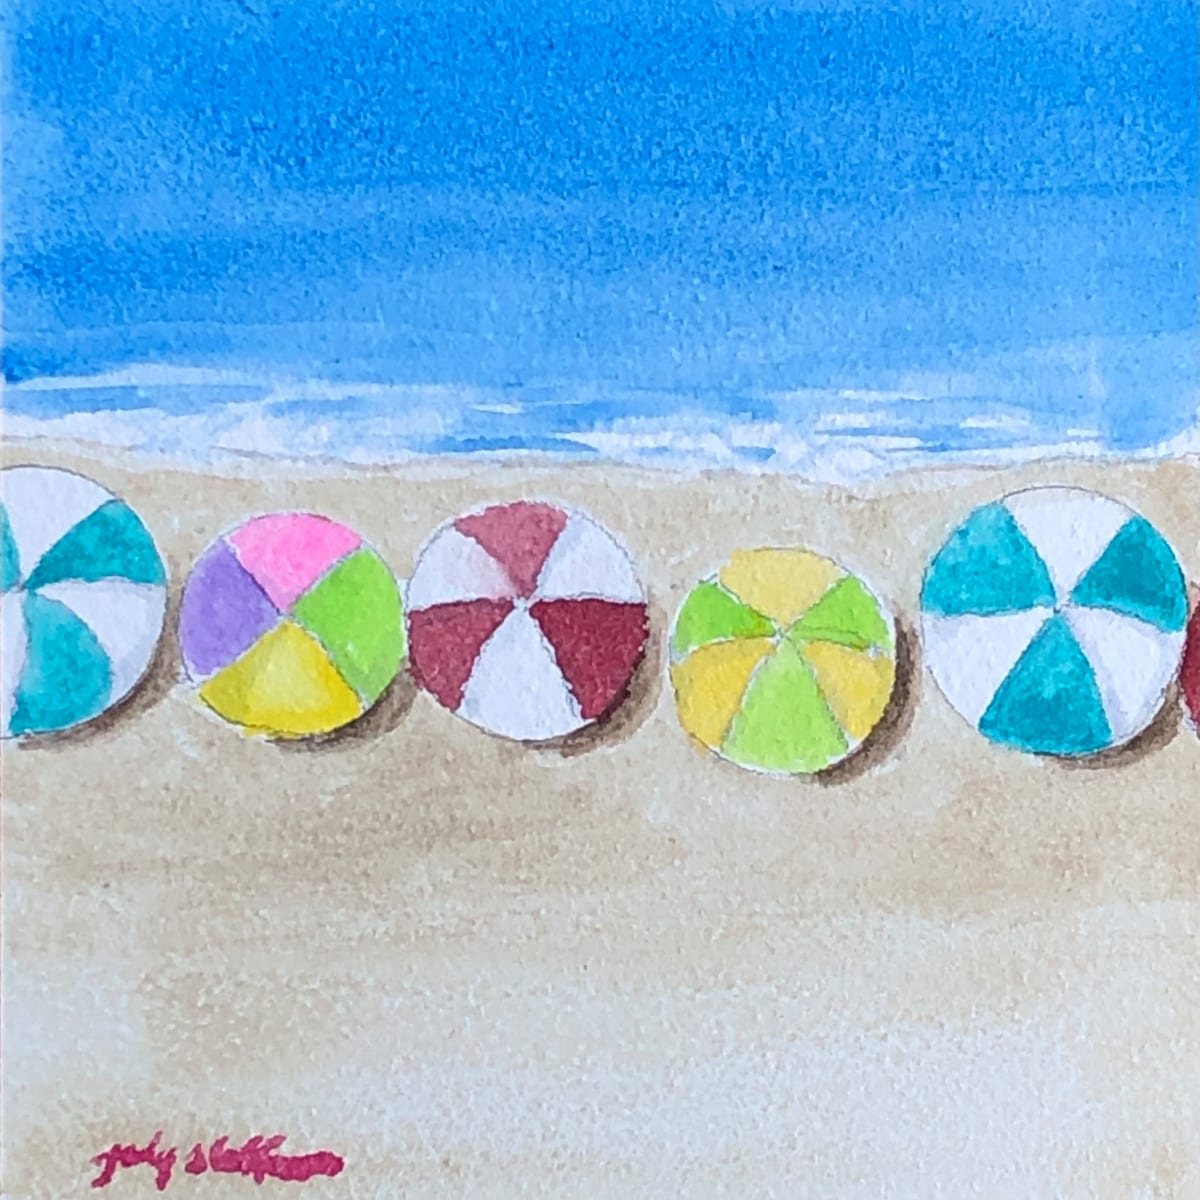 Holiday  Image: Tiny 4" x 4" watercolor painting.